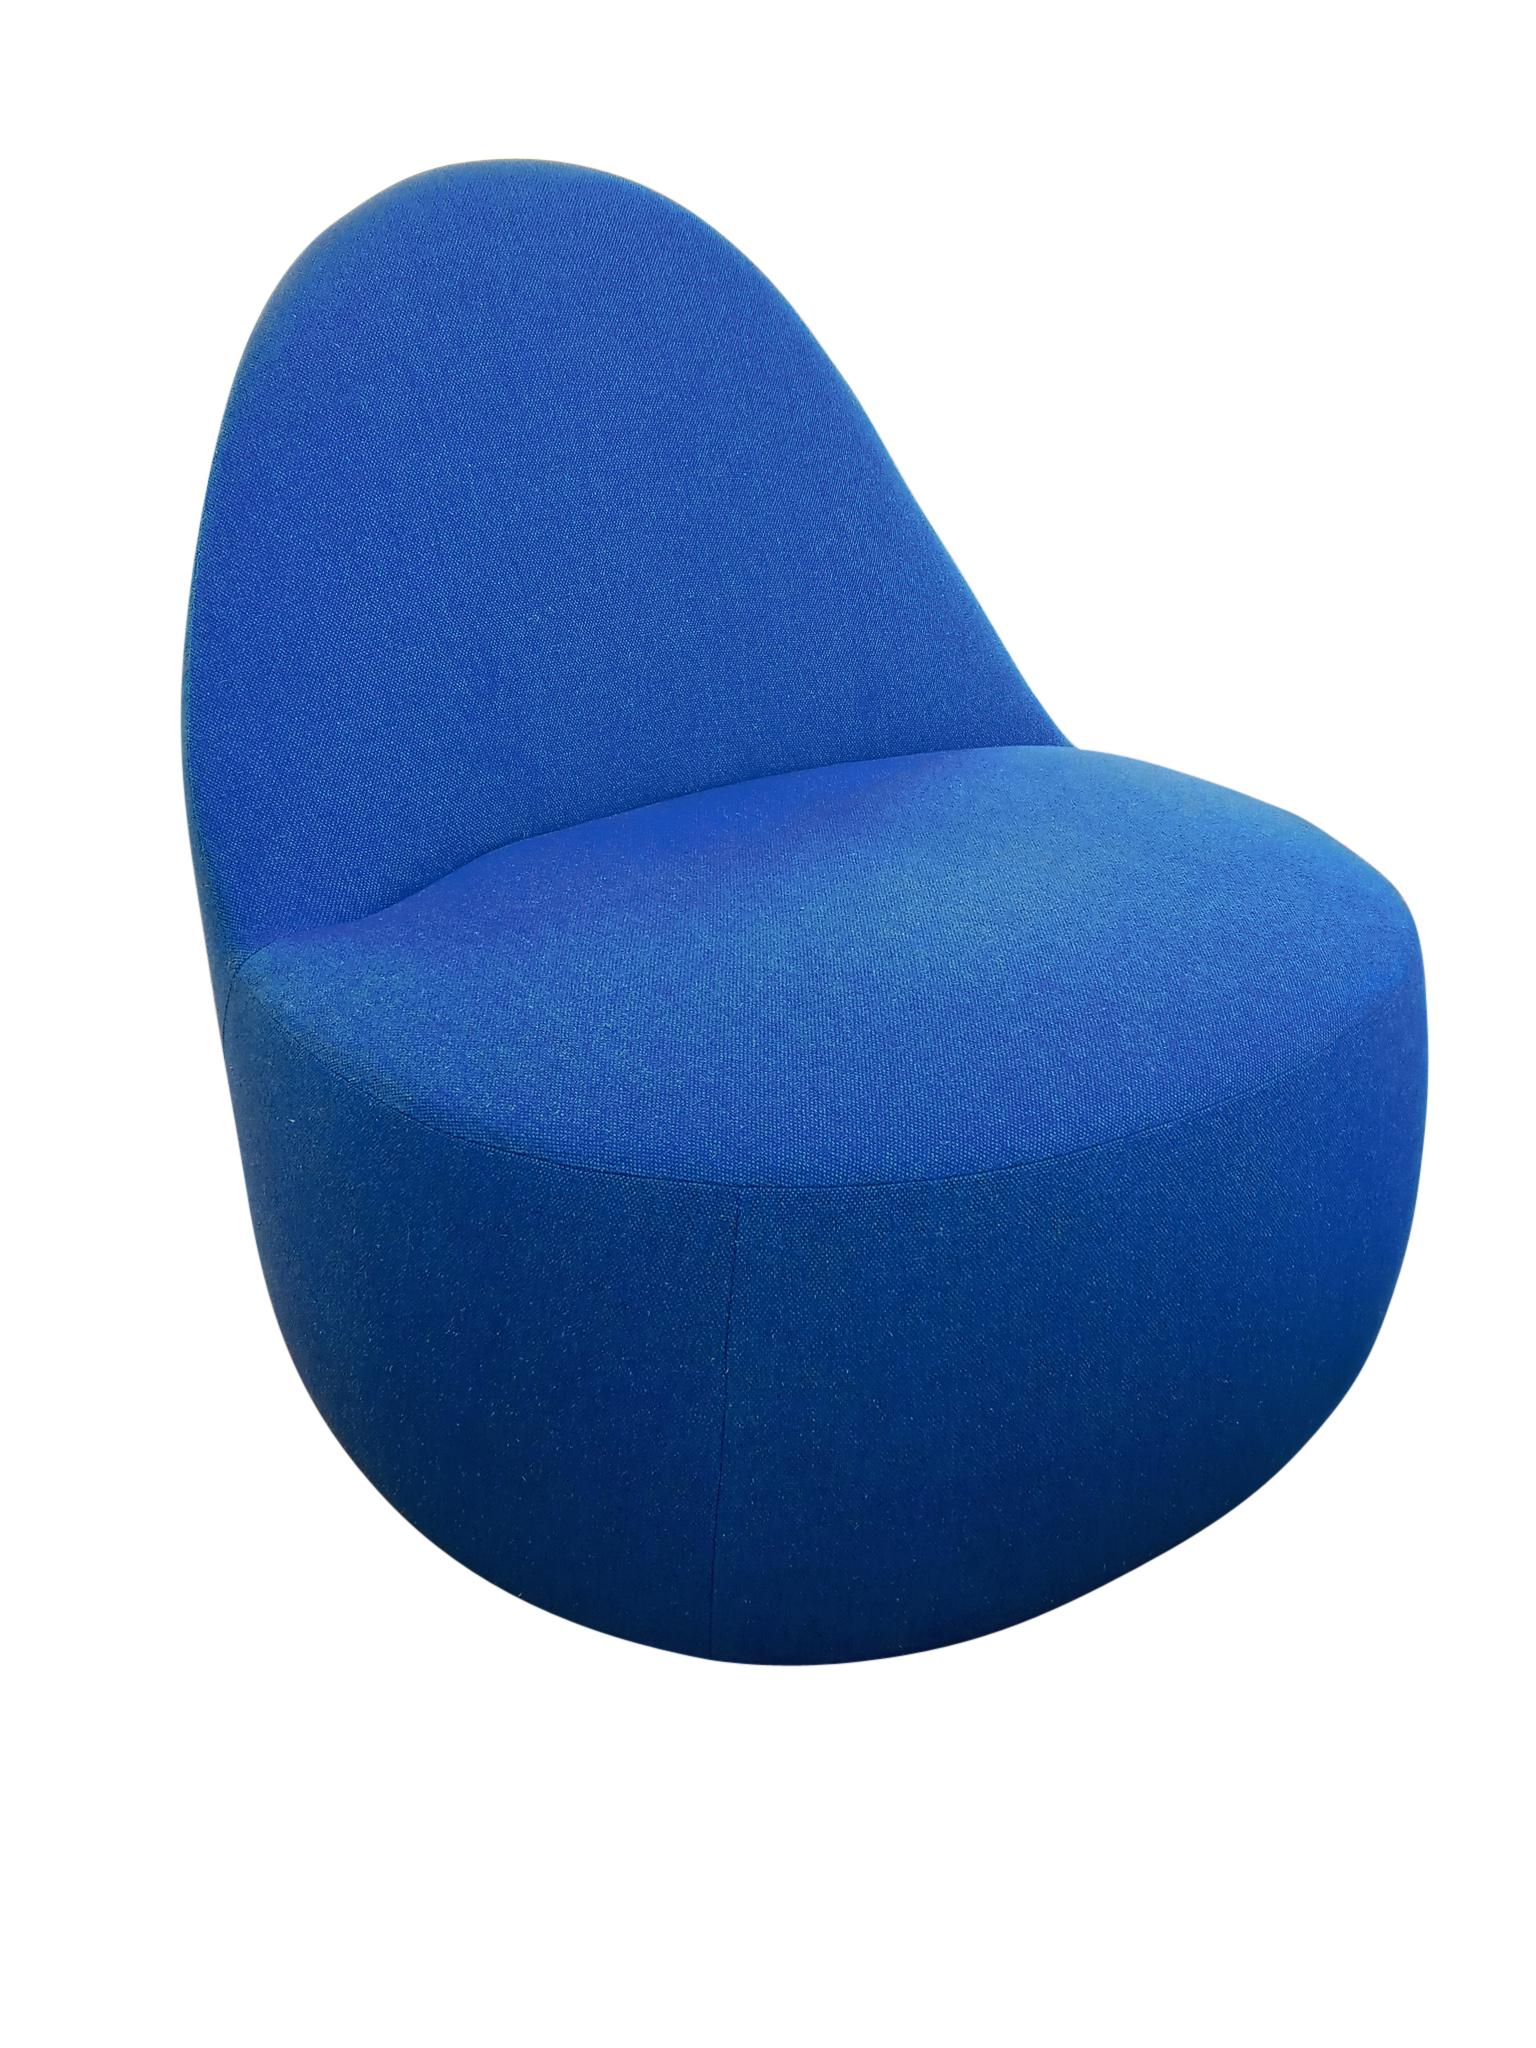 American Pair of Mitt Lounge Chairs by Harry & Claudia Washington for Berhardt, Deep Blue For Sale